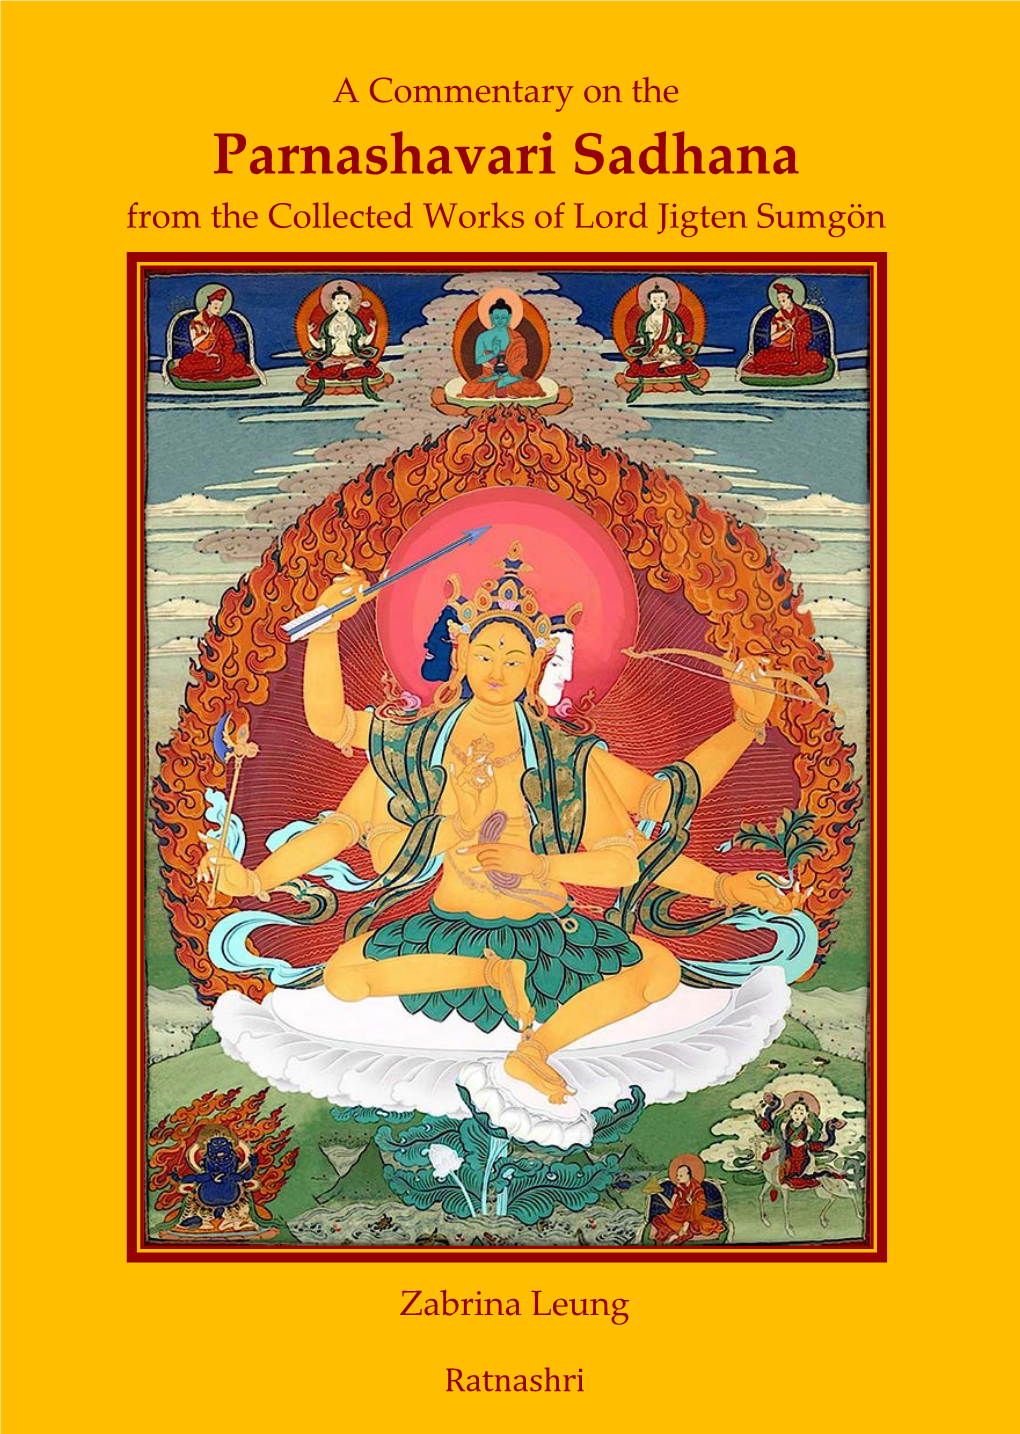 A Commentary on the Parnashavari Sadhana from the Collected Works of Lord Jigten Sumgön